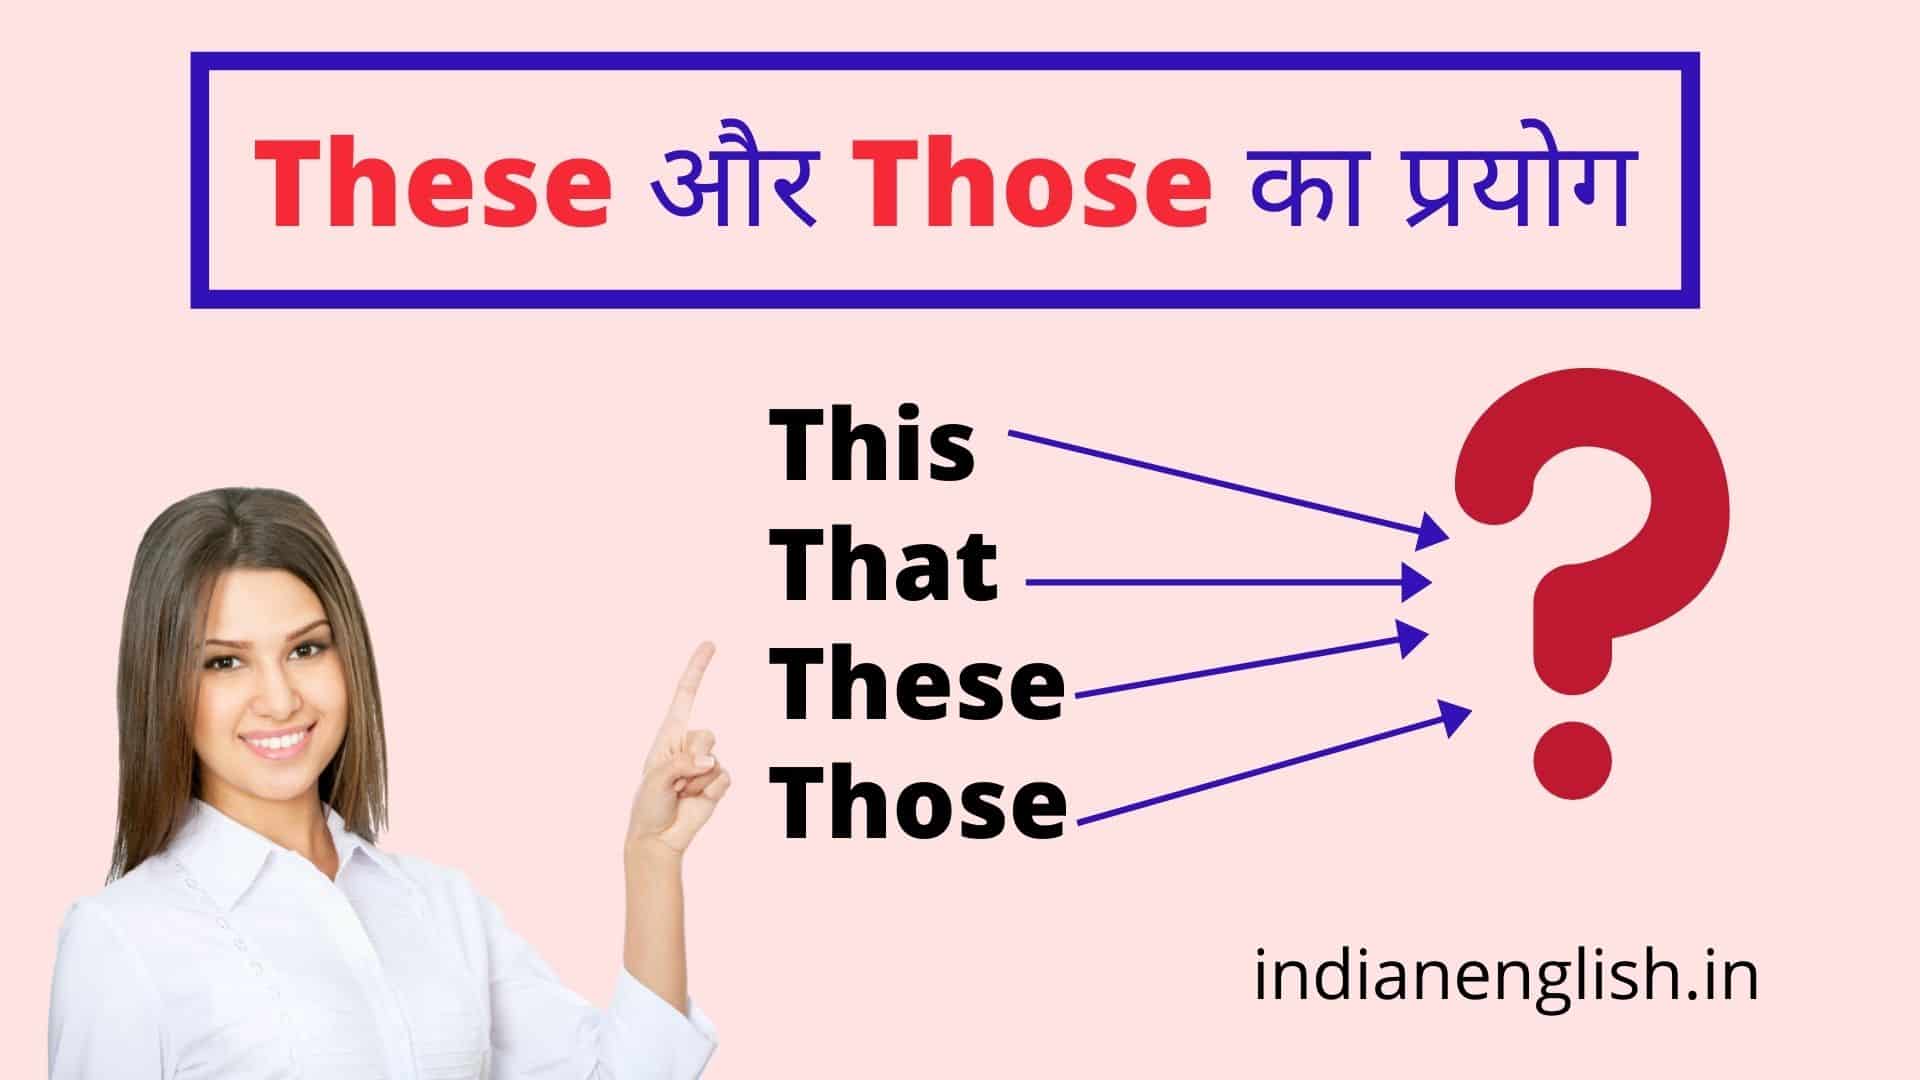 these meaning in hindi language